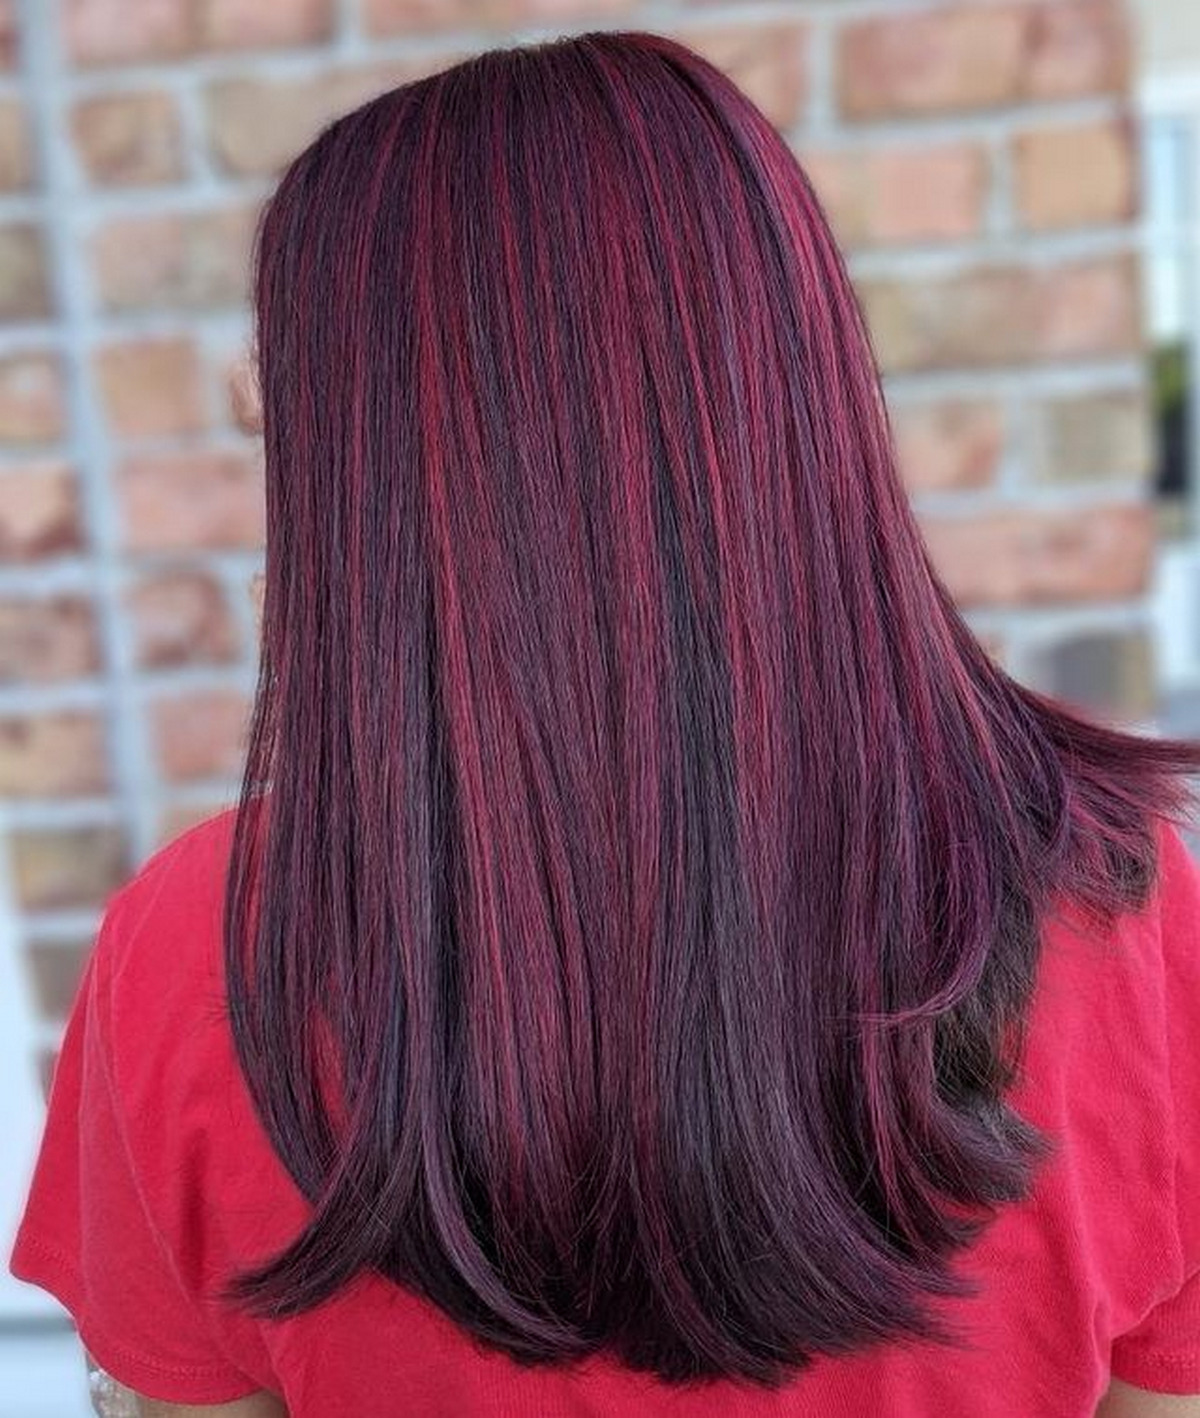 Straight Black Hair With Red Violet Highlights